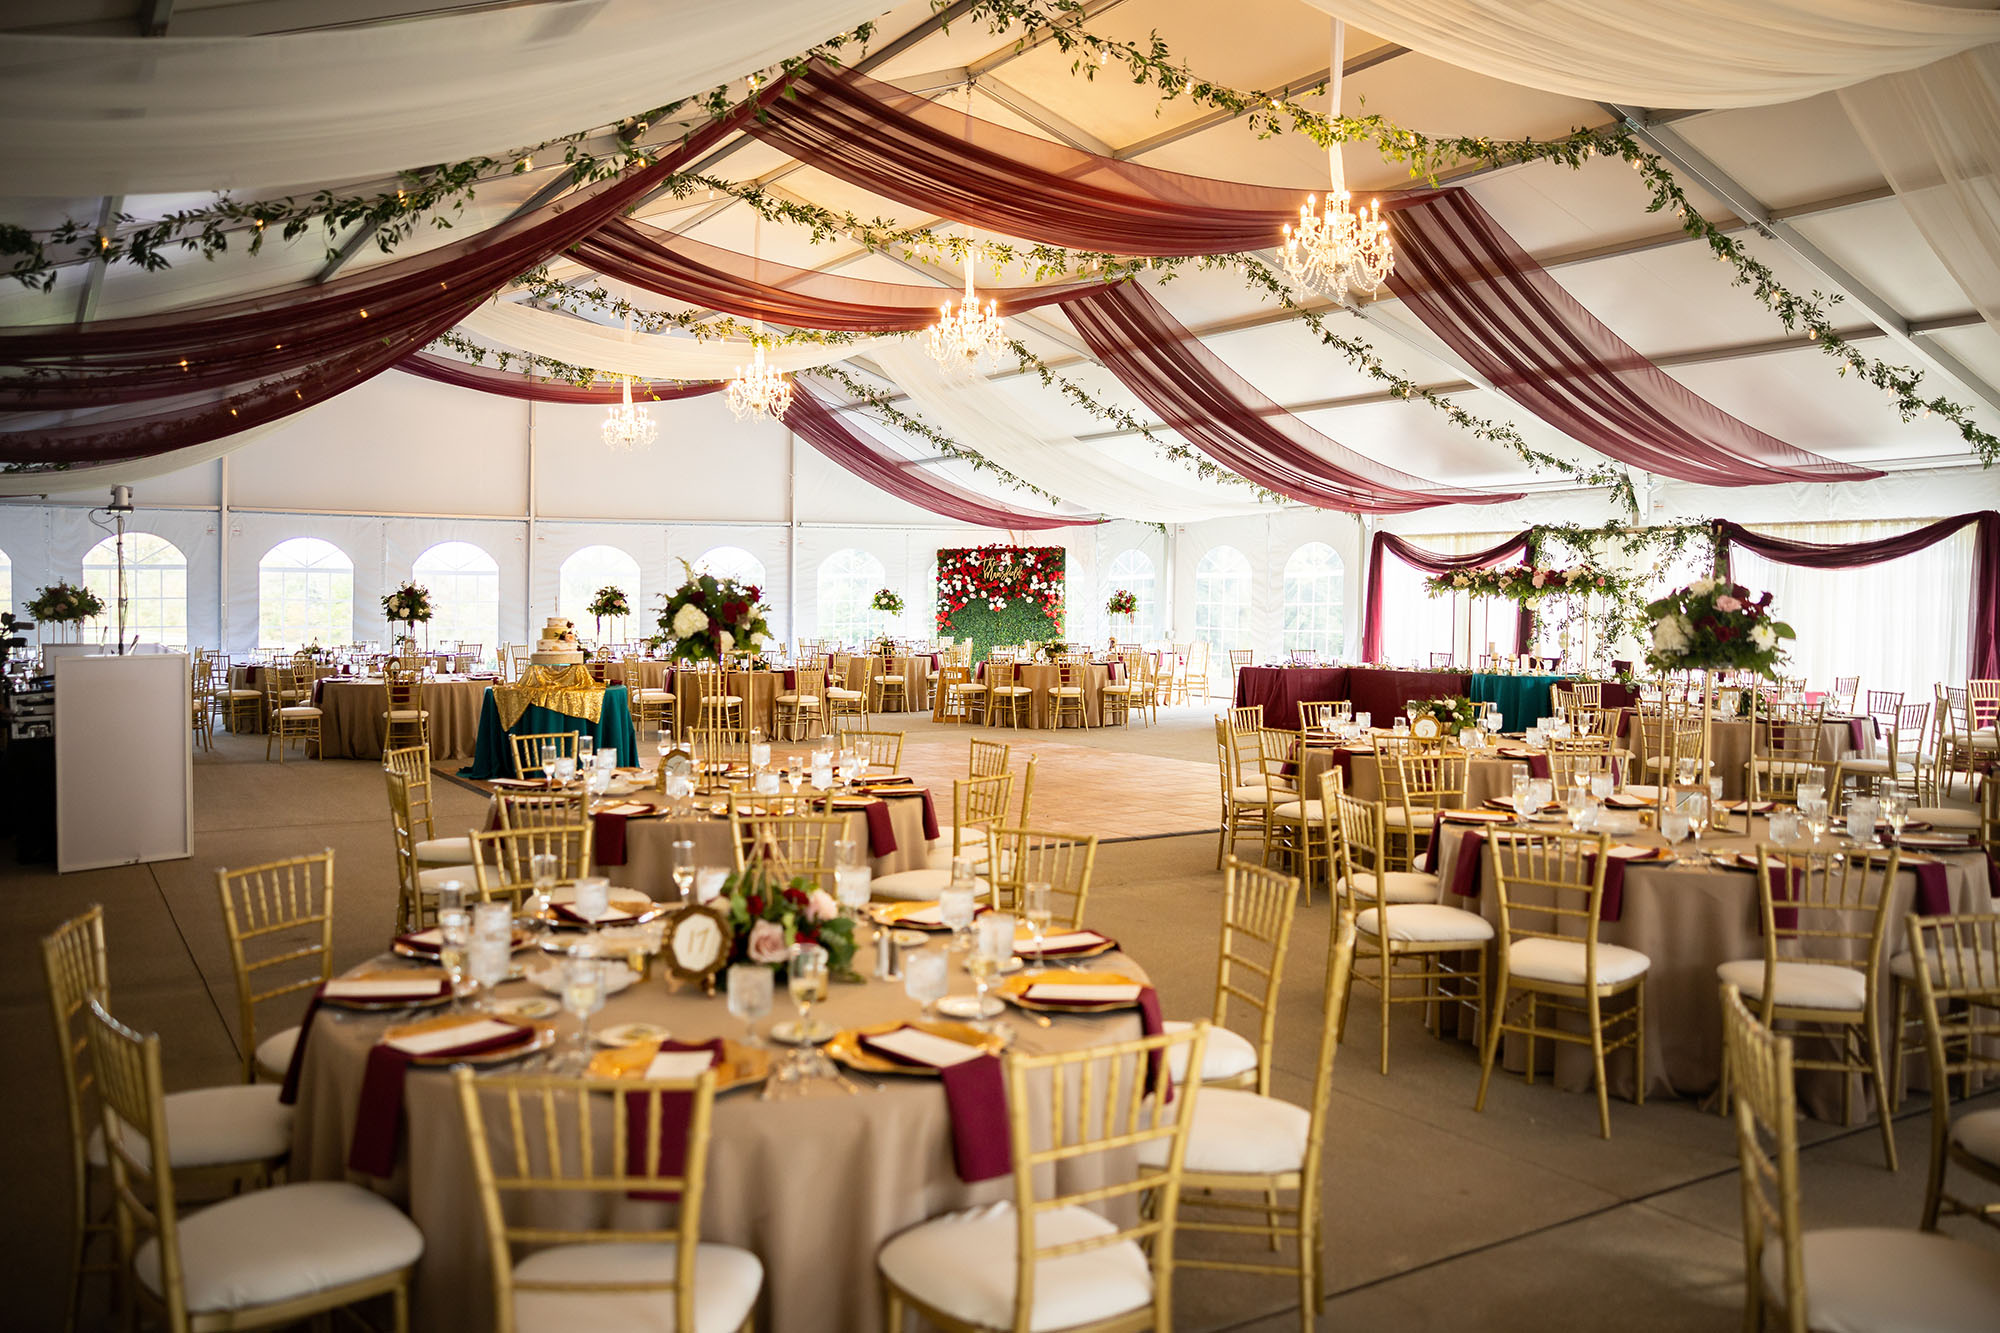 Burgundy & Ivory Draping w/ Greenery Covered Bistro Lighting - Linden Hall